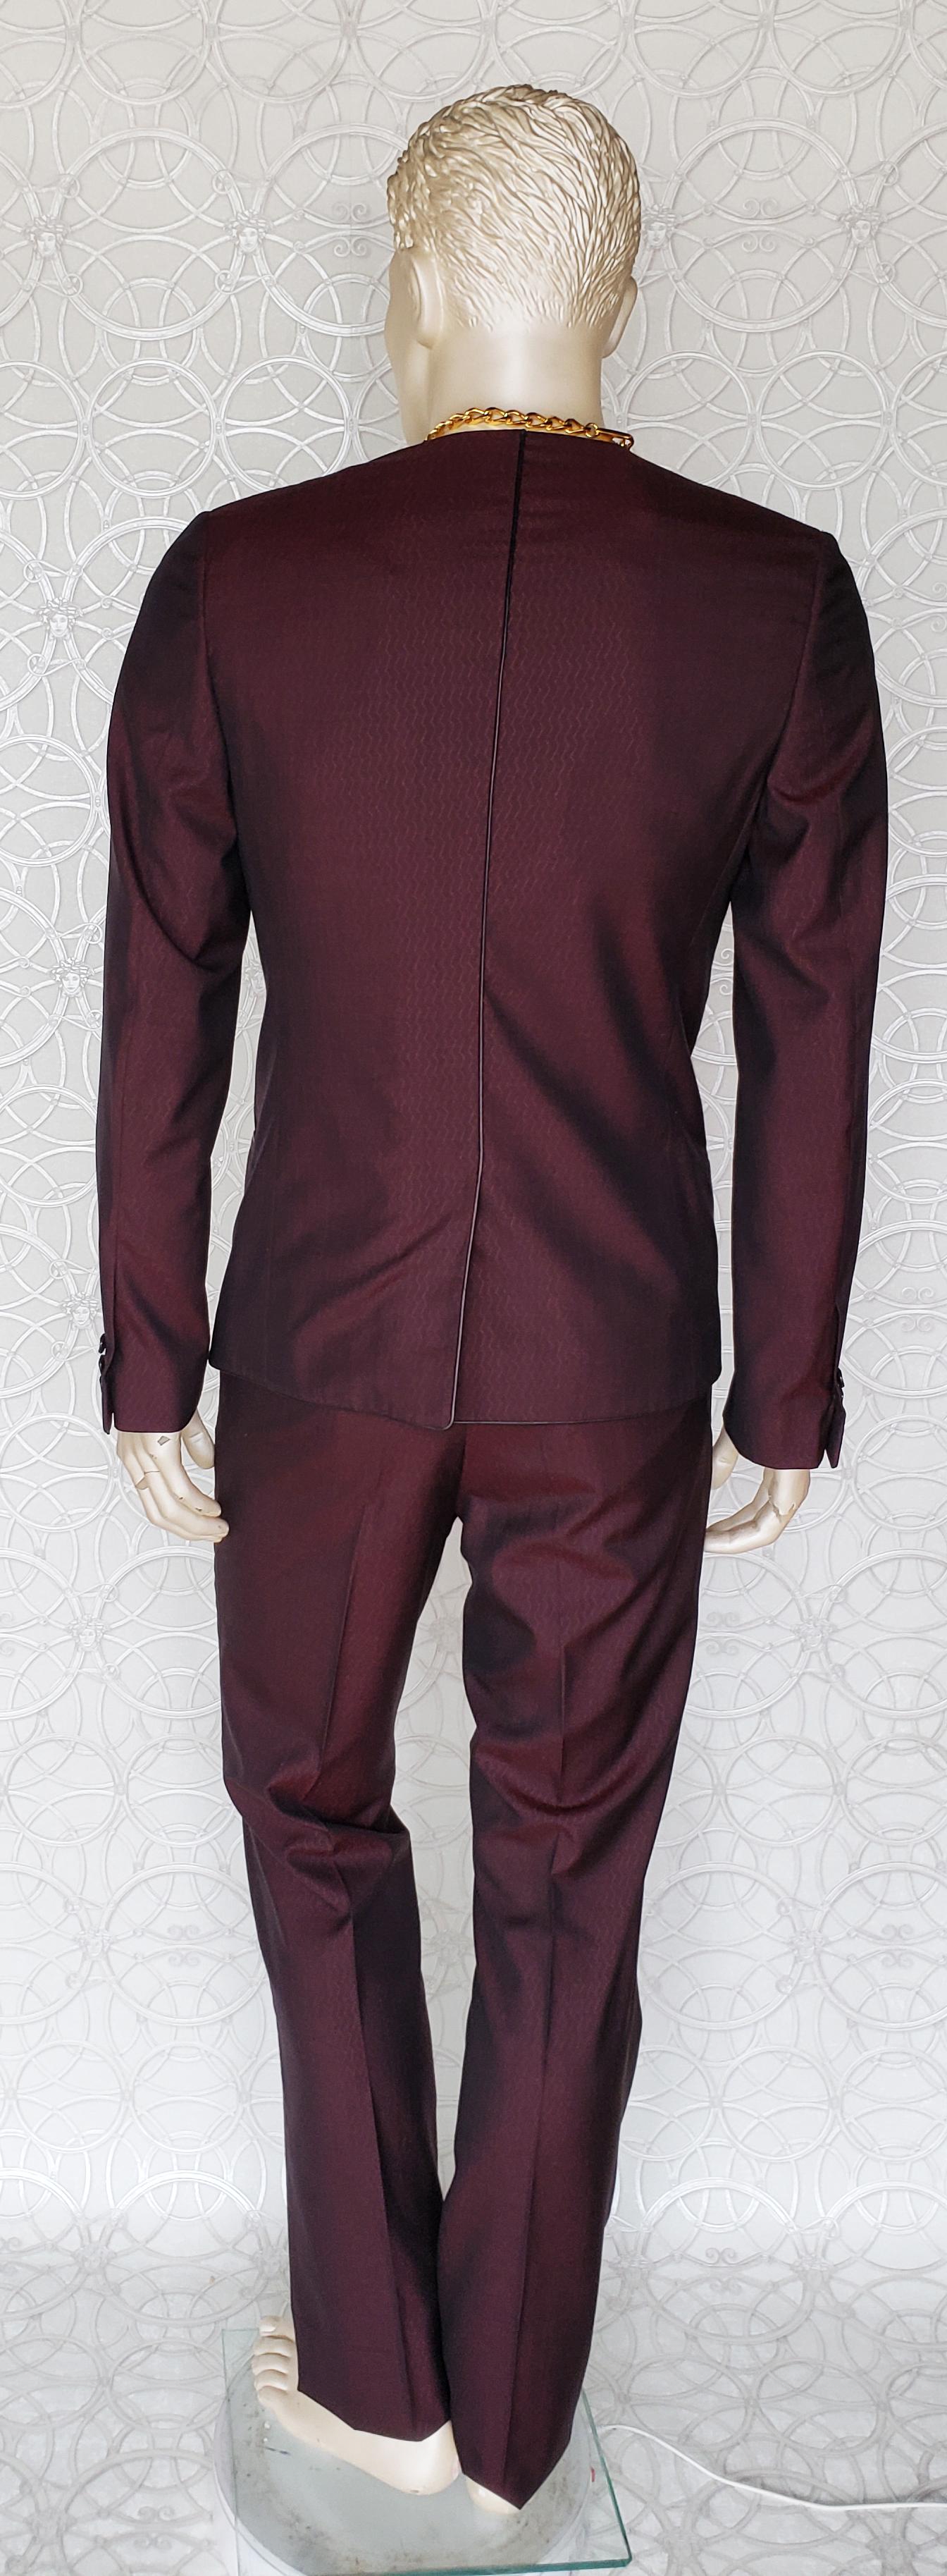 Black S/S 2011 look #19 NEW VERSACE BURGUNDY WOOL and SILK SUIT 48 - 38 (M) For Sale